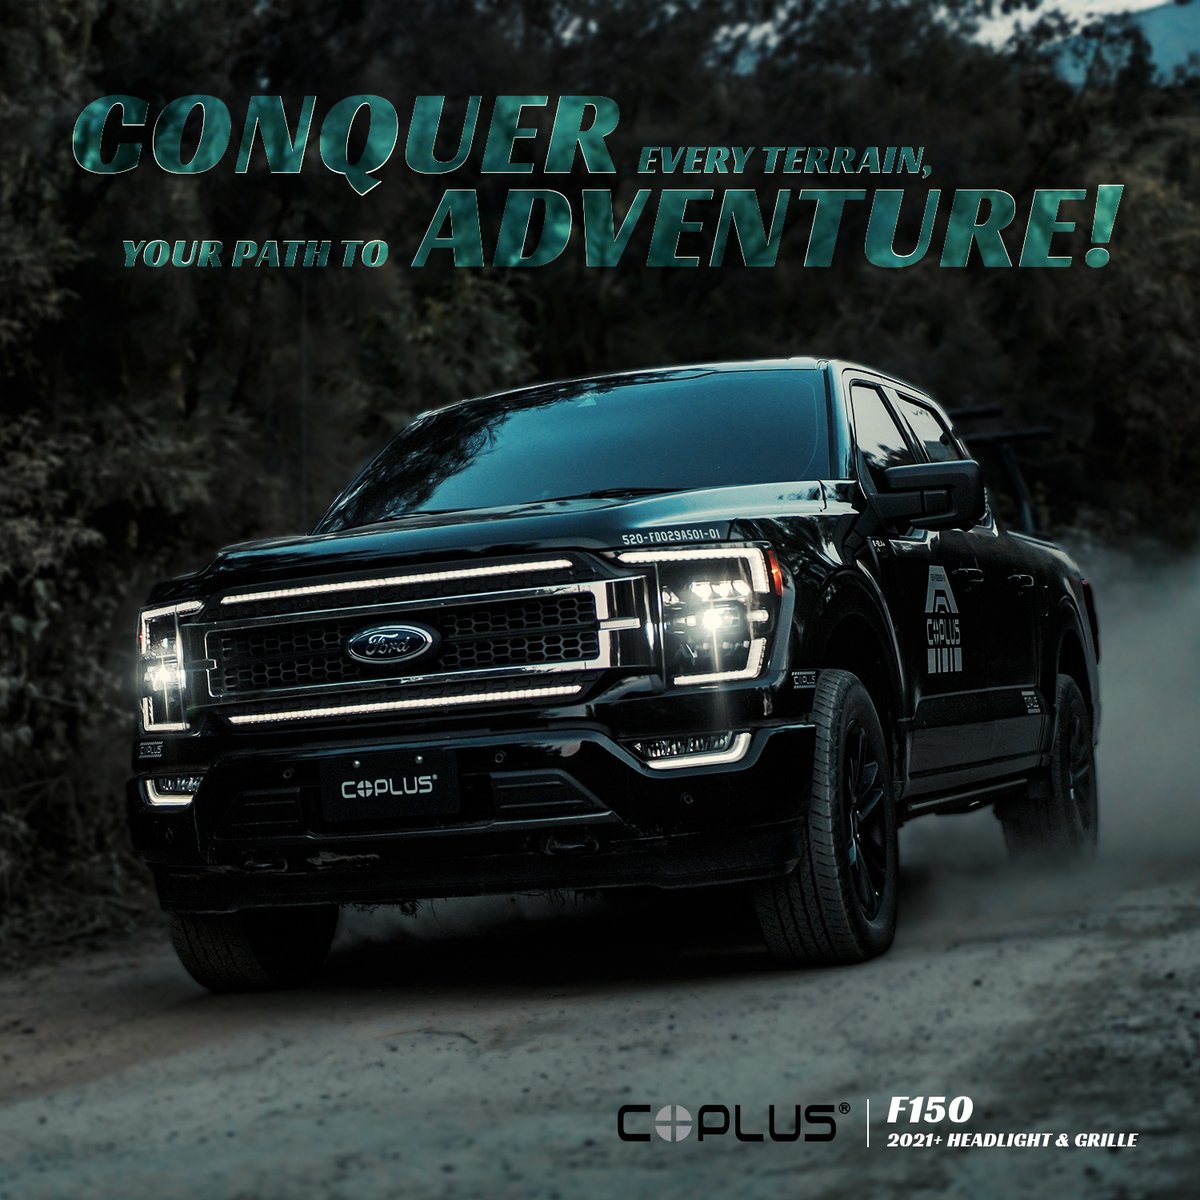 Aggressive Looks, Aggressive Performance! 
Don't just drive, make a statement on every road you conquer! 🔥
　　
#ford #fordperformance #F150 #fordf150 #fordtrucks #ford150 #fordnation #f150lightning #fordpickup #fordpickuptruck #pickup #lighting #performance #coplus